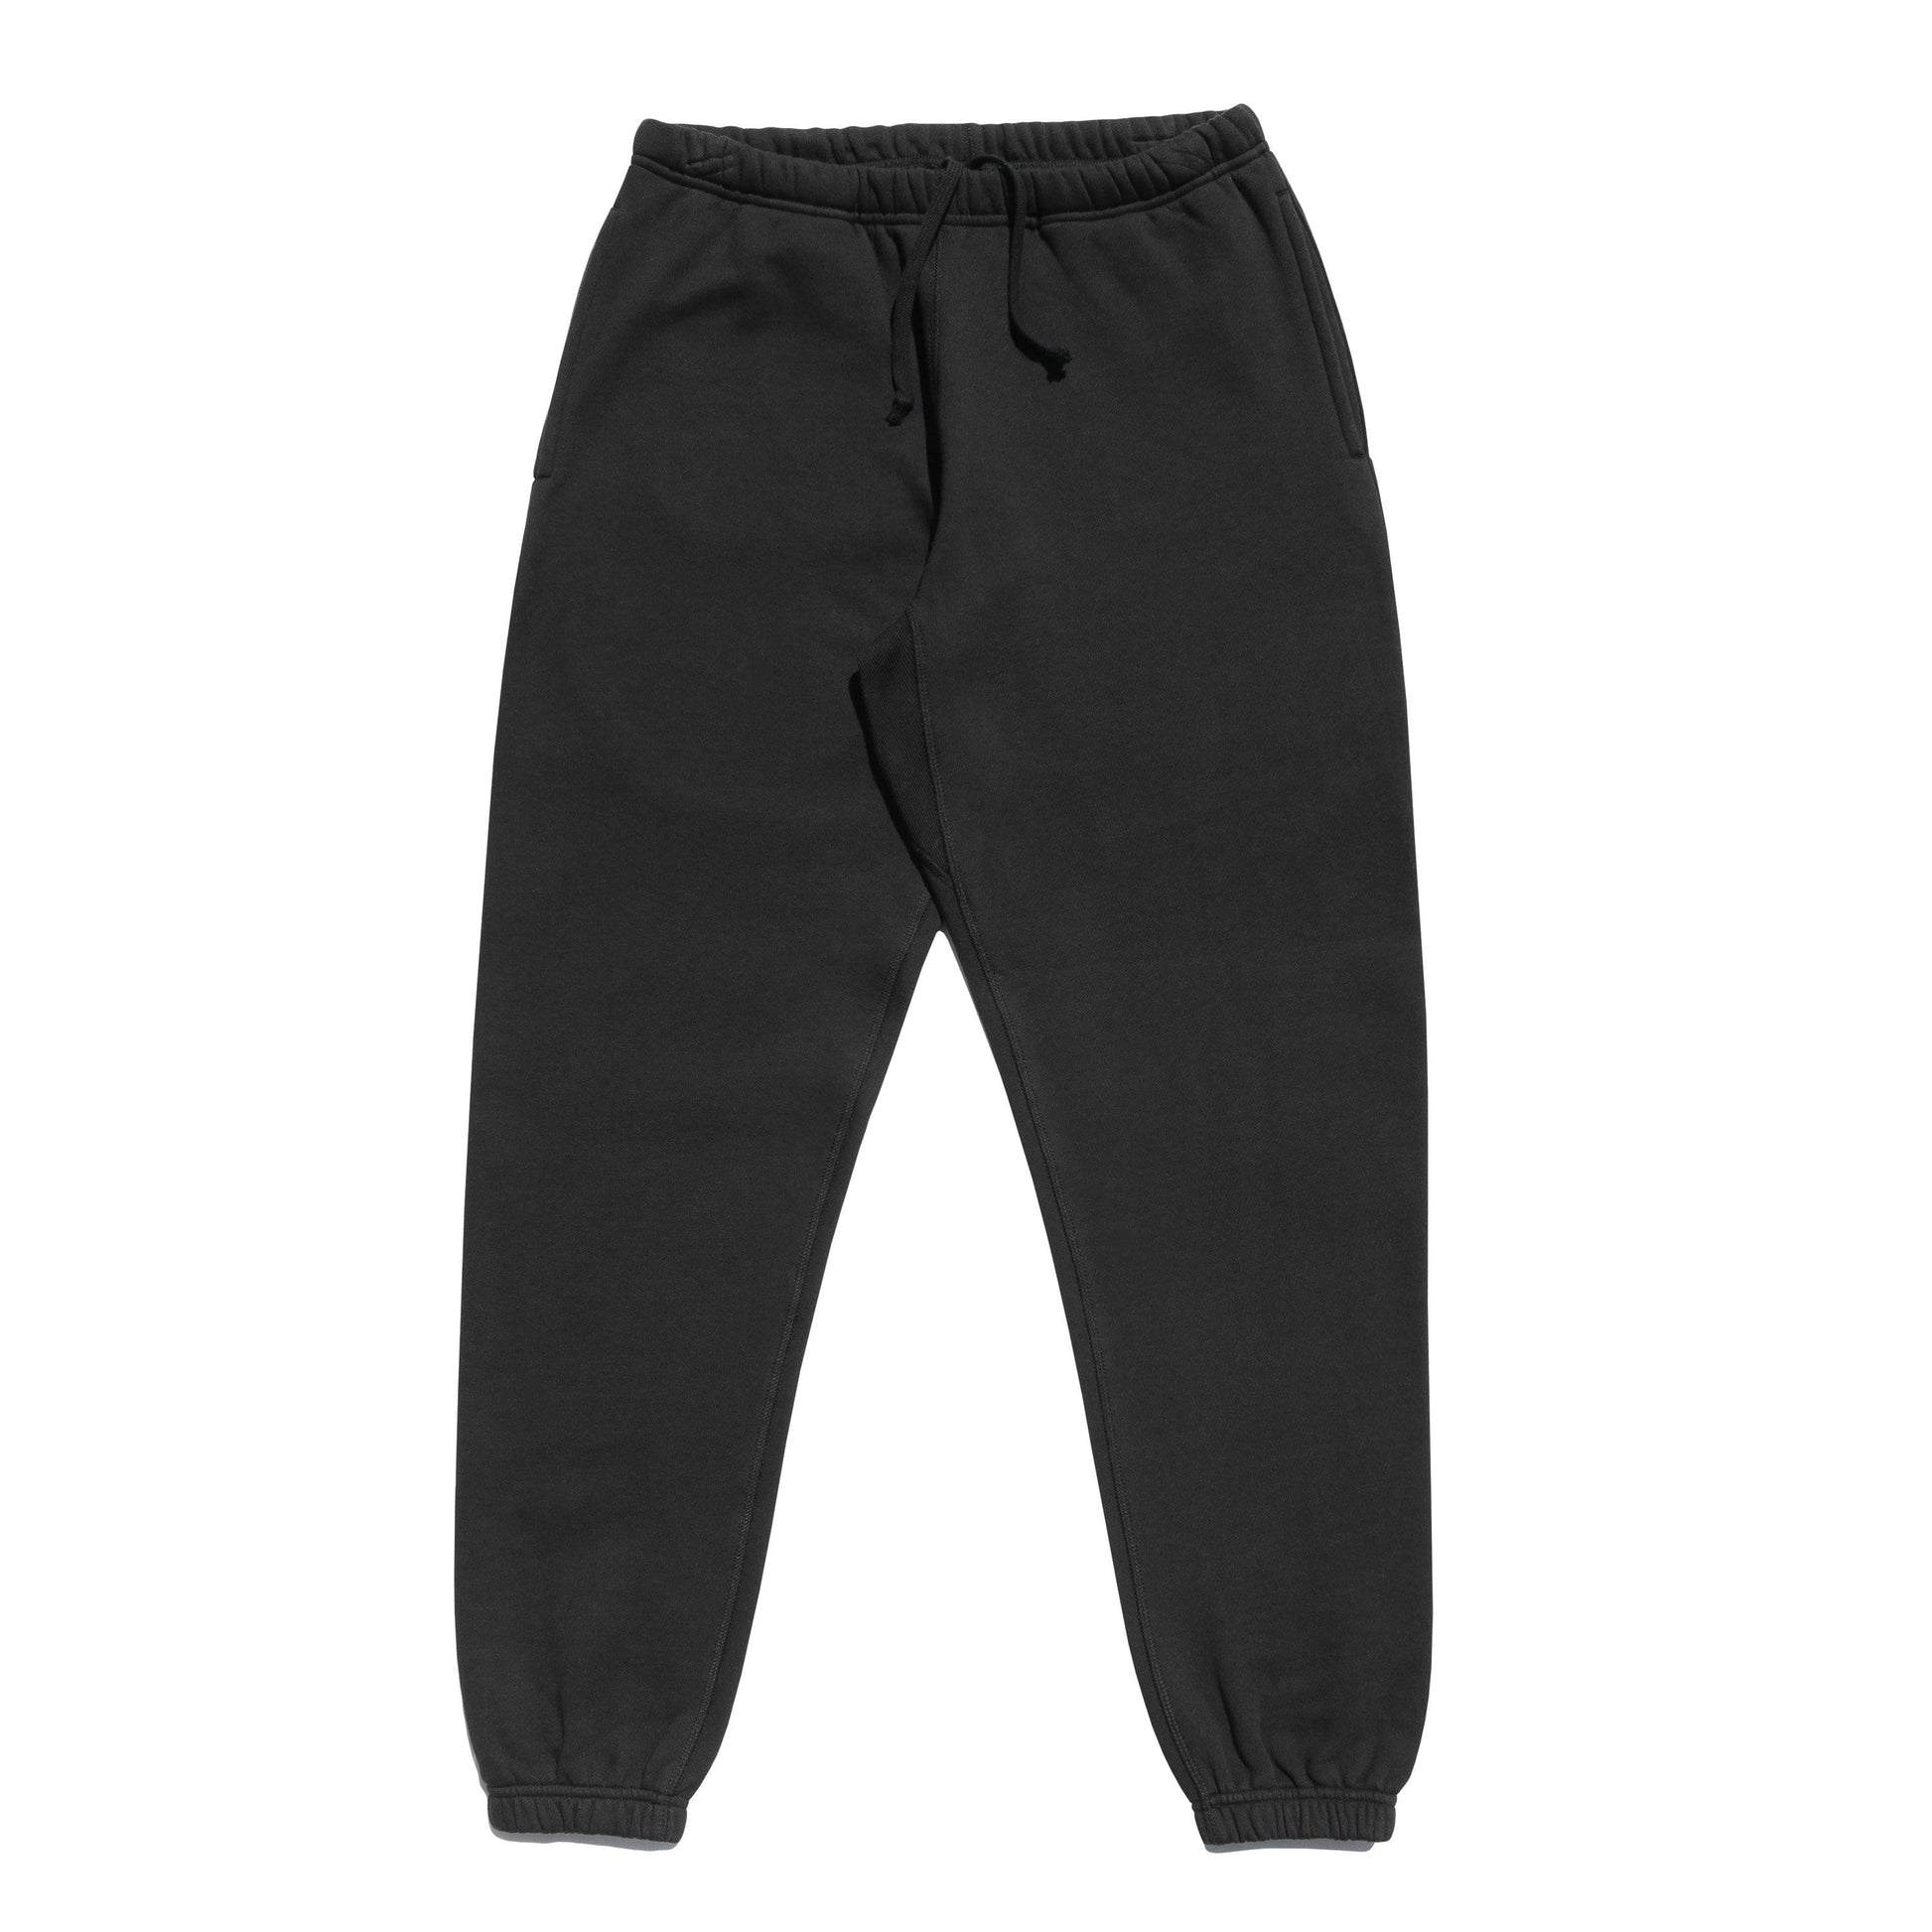 Sweat pants with 20% discount!